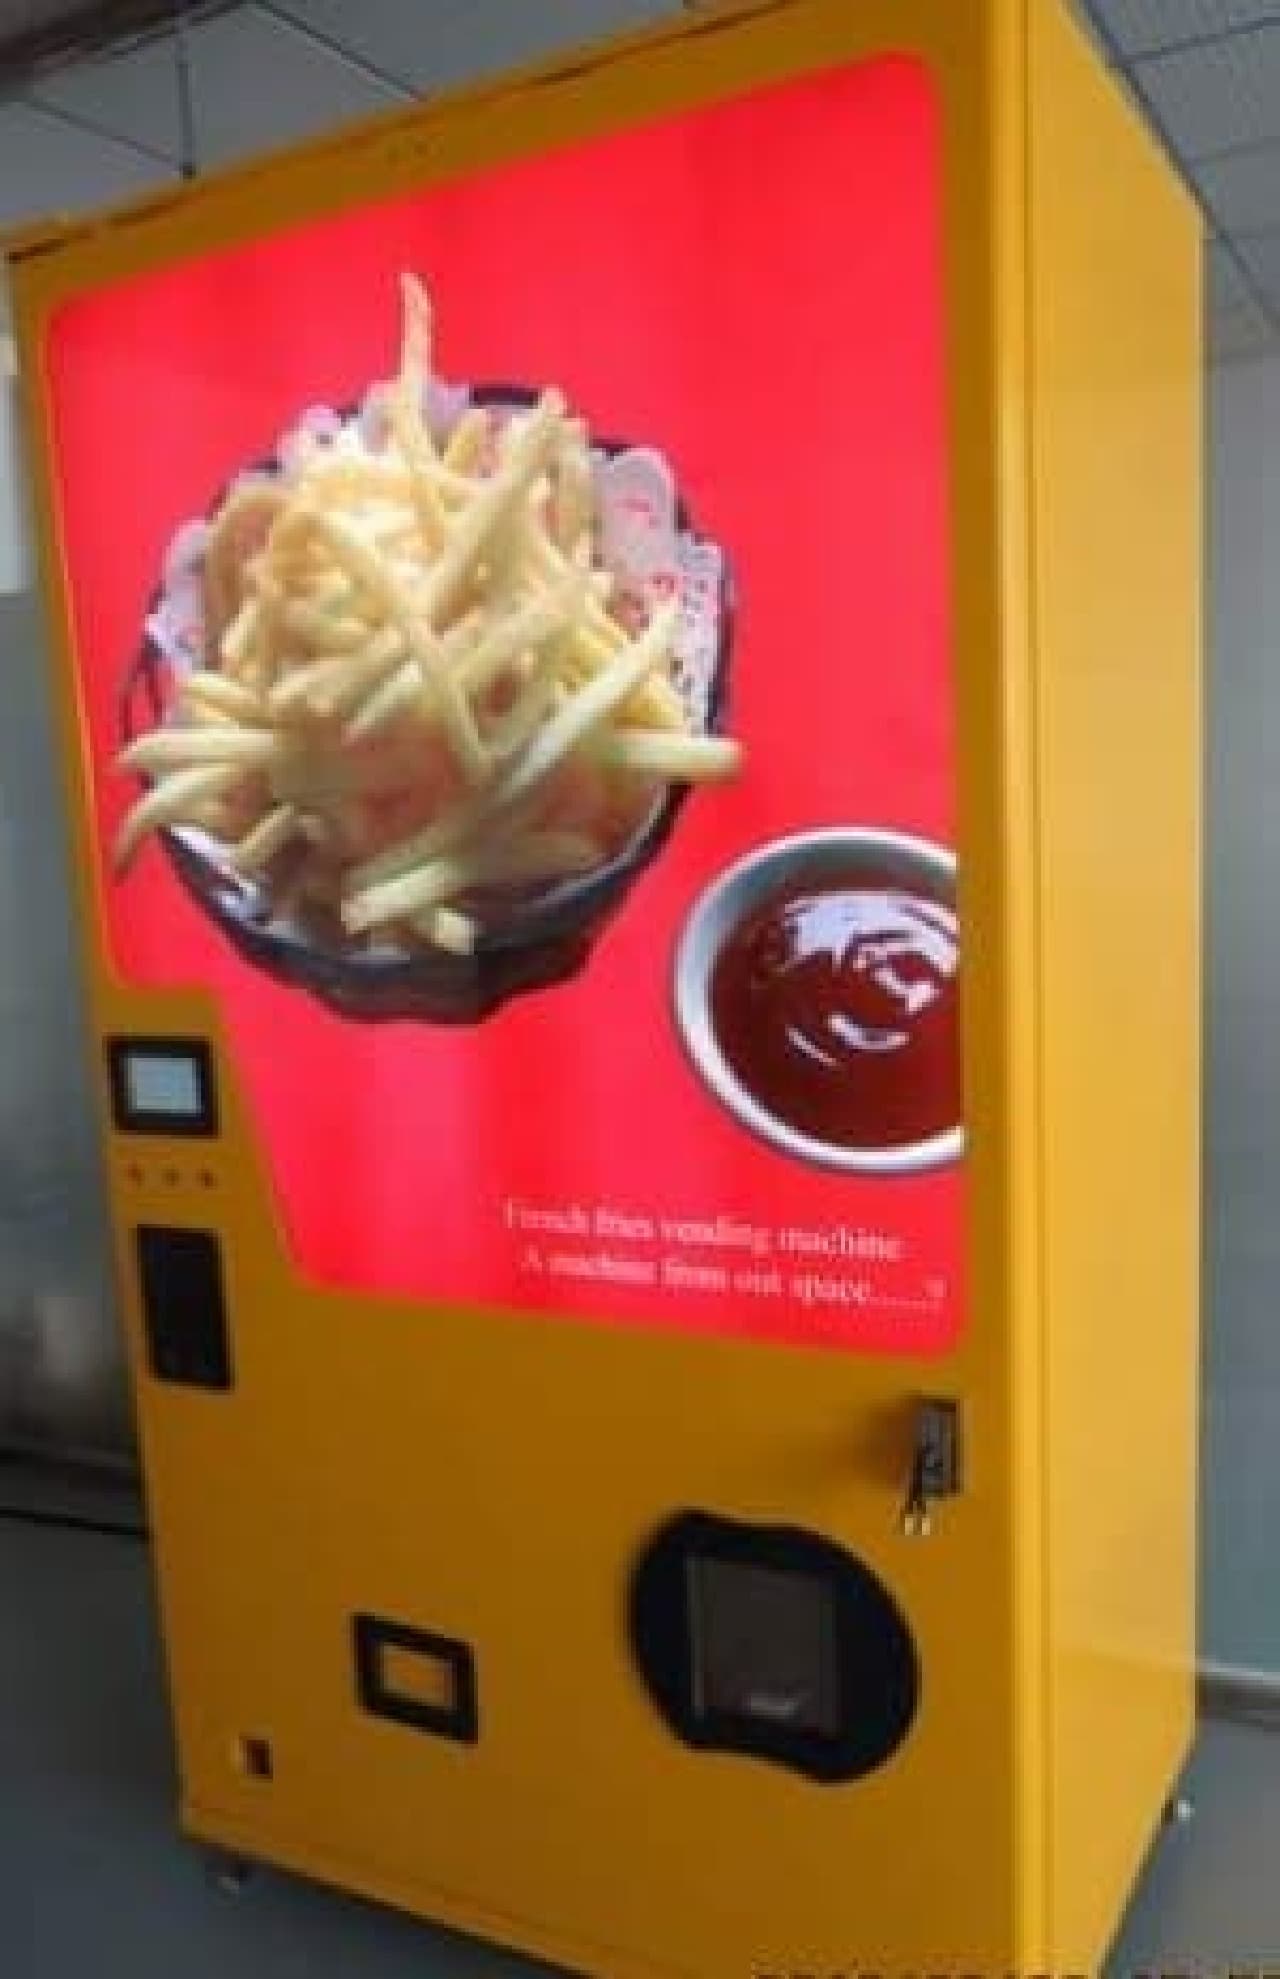 You can buy Hook Hoku French fries at the vending machine!